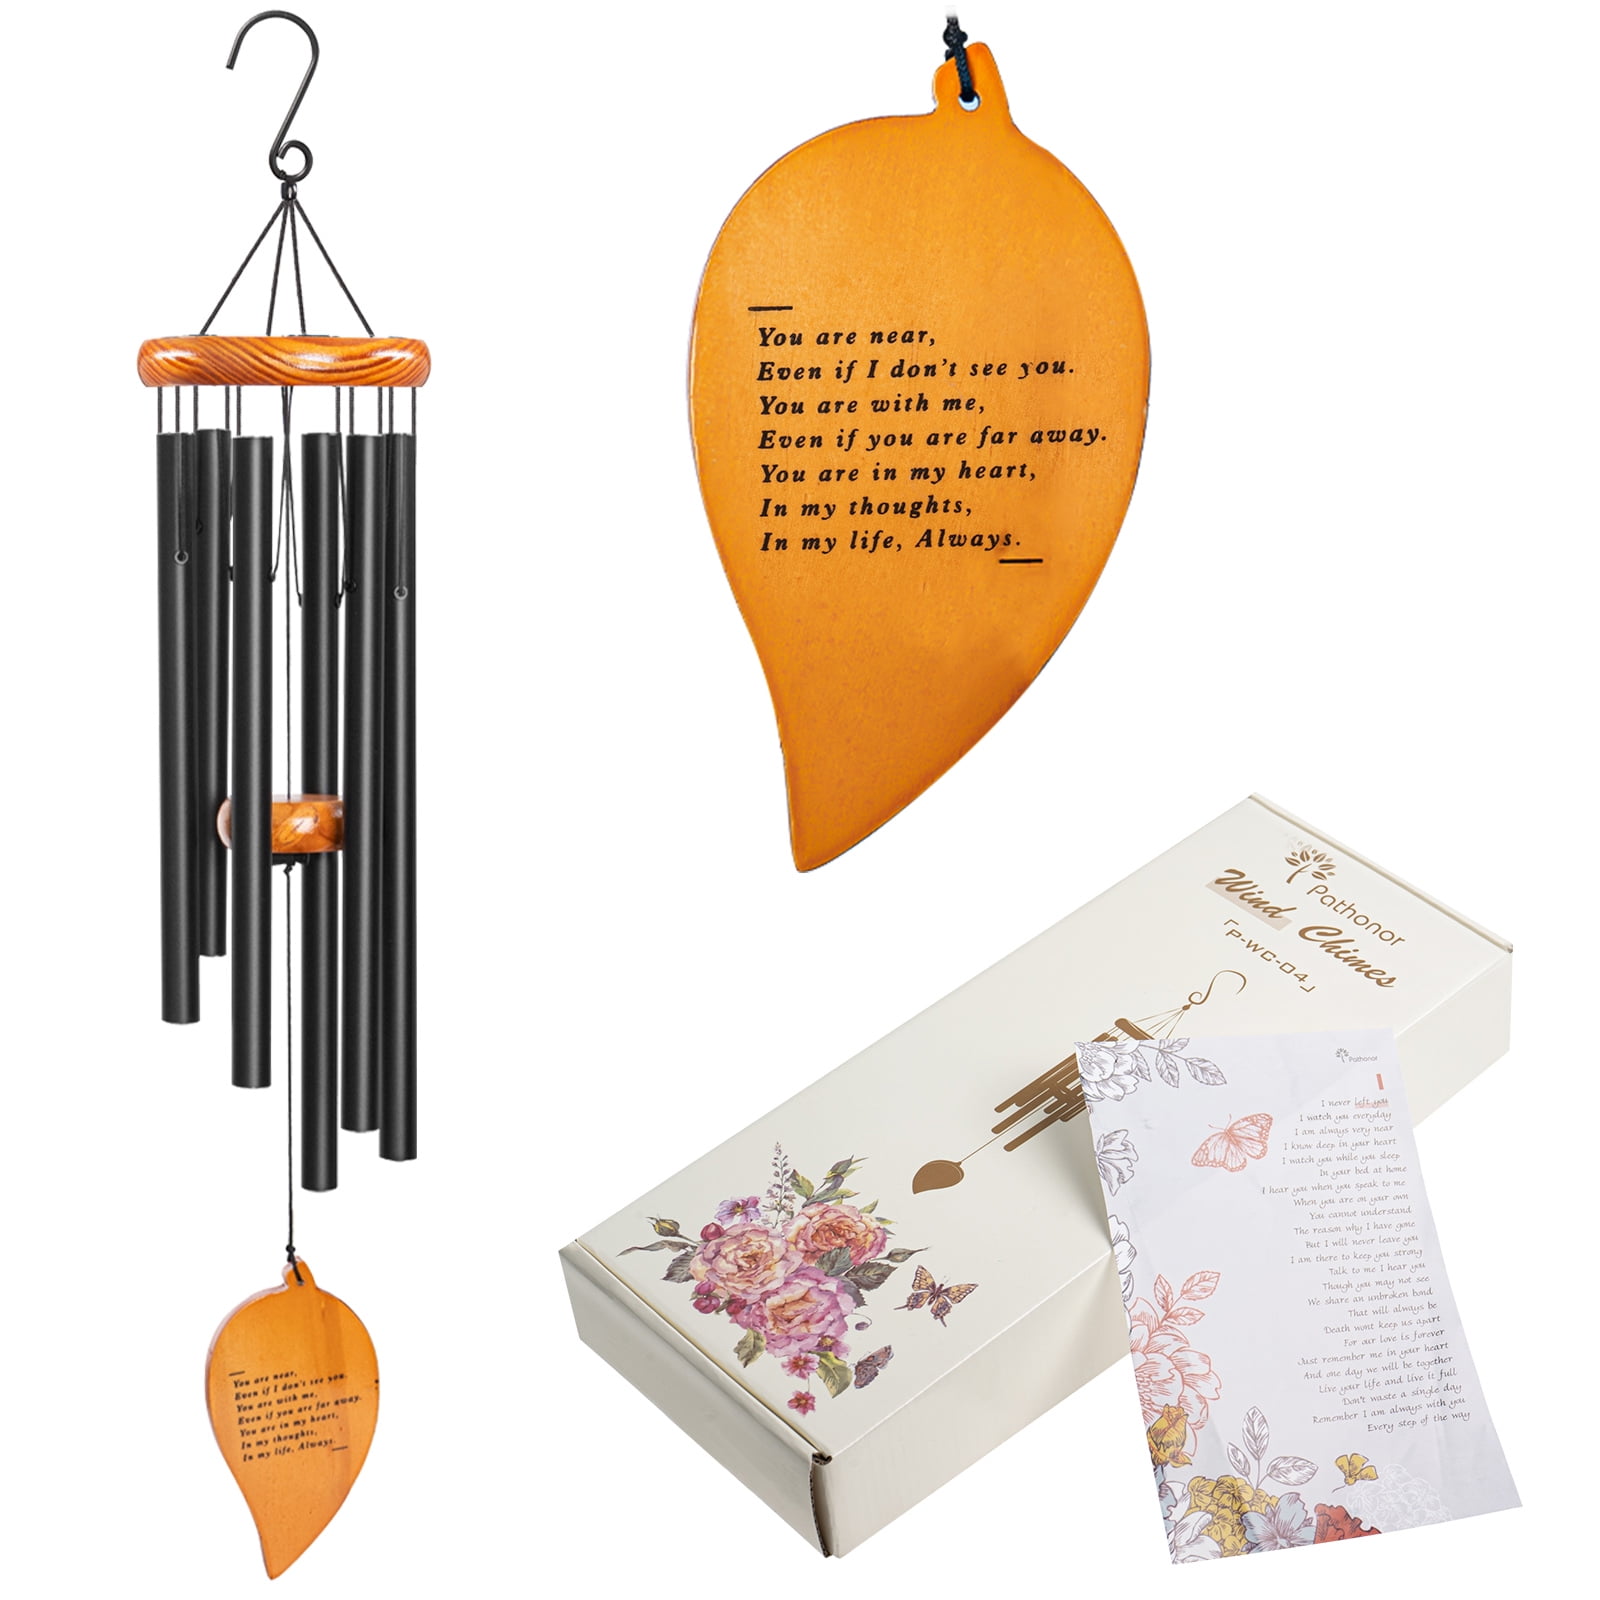 Celebration of Life Memorial Wind Chimes/Sympathy Wind Chimes in Loving Memory of Loved One Ideal Sympathy Gift/Bereavement Gift/Condolence Gift That Lasts Longer Than Flowers